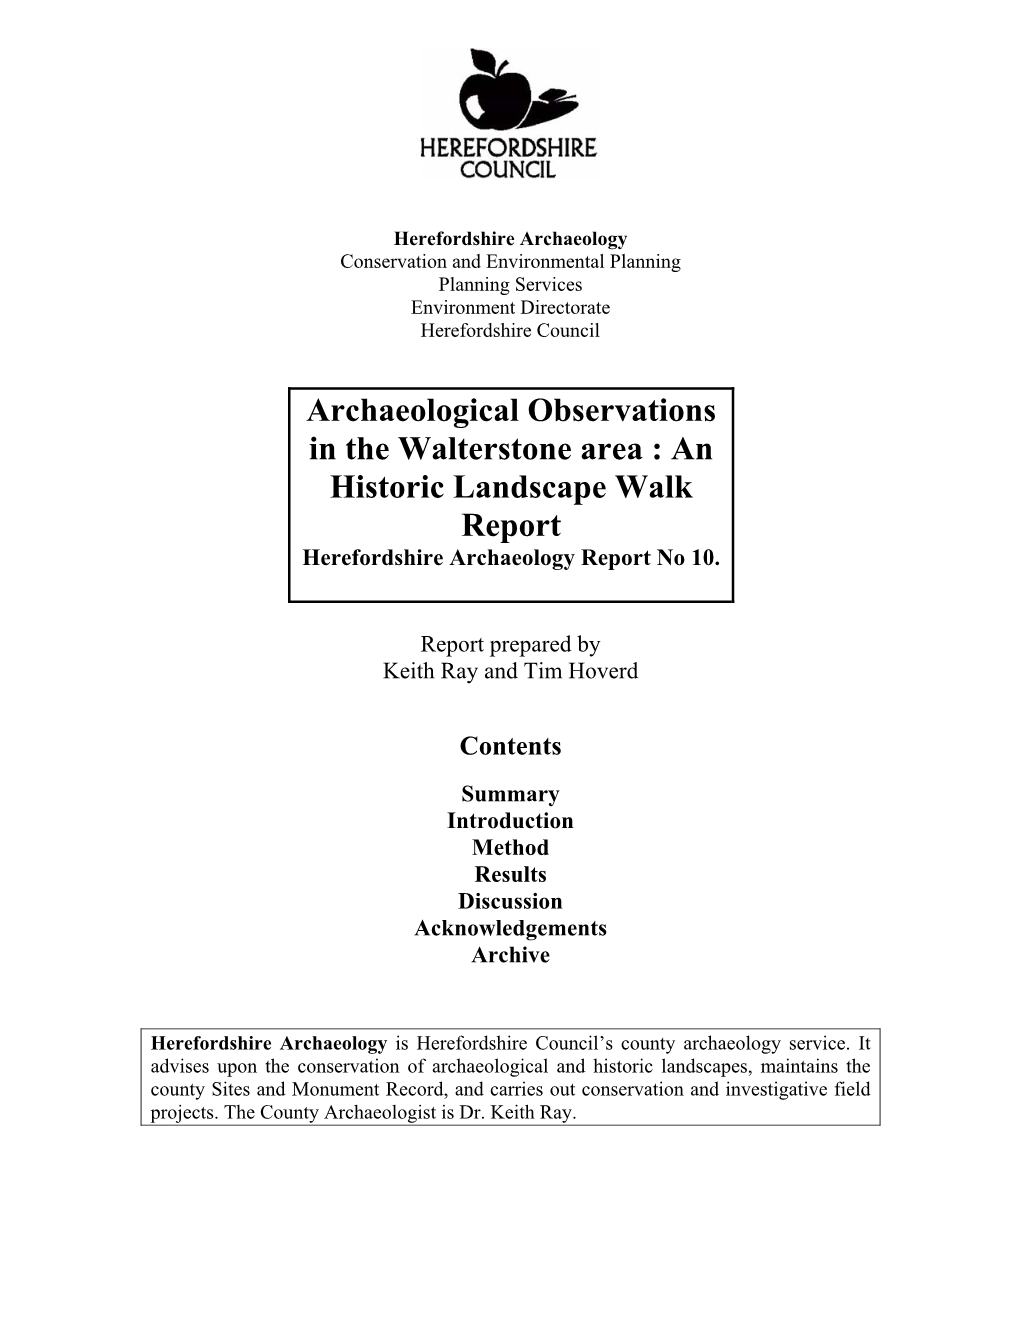 Archaeological Observations in the Walterstone Area : an Historic Landscape Walk Report Herefordshire Archaeology Report No 10